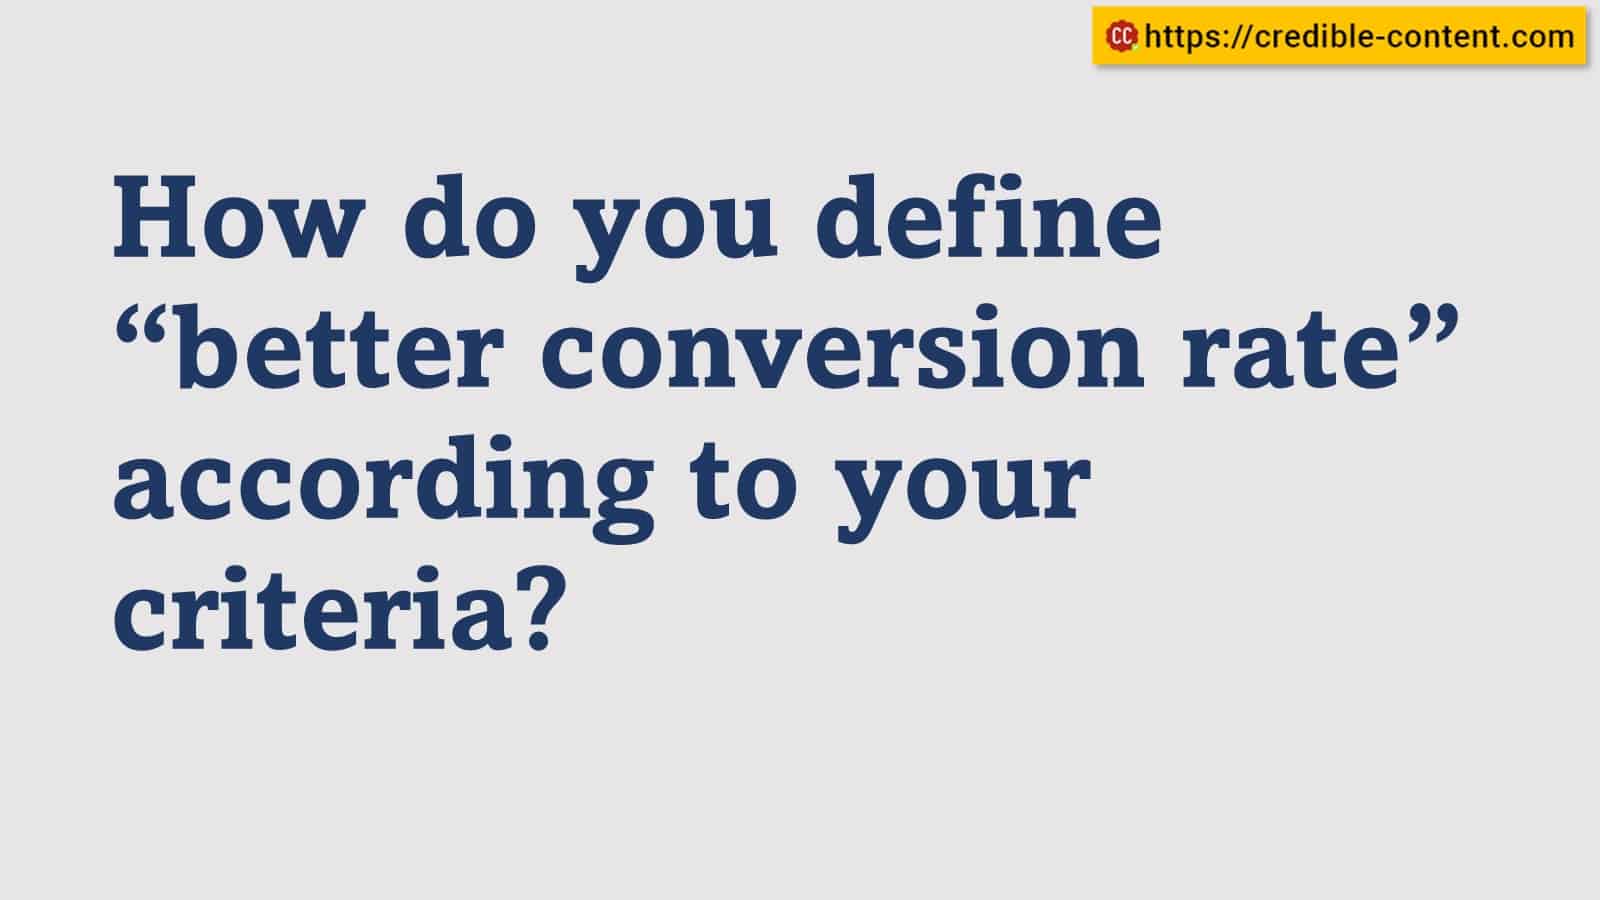 How do you define better conversion rate